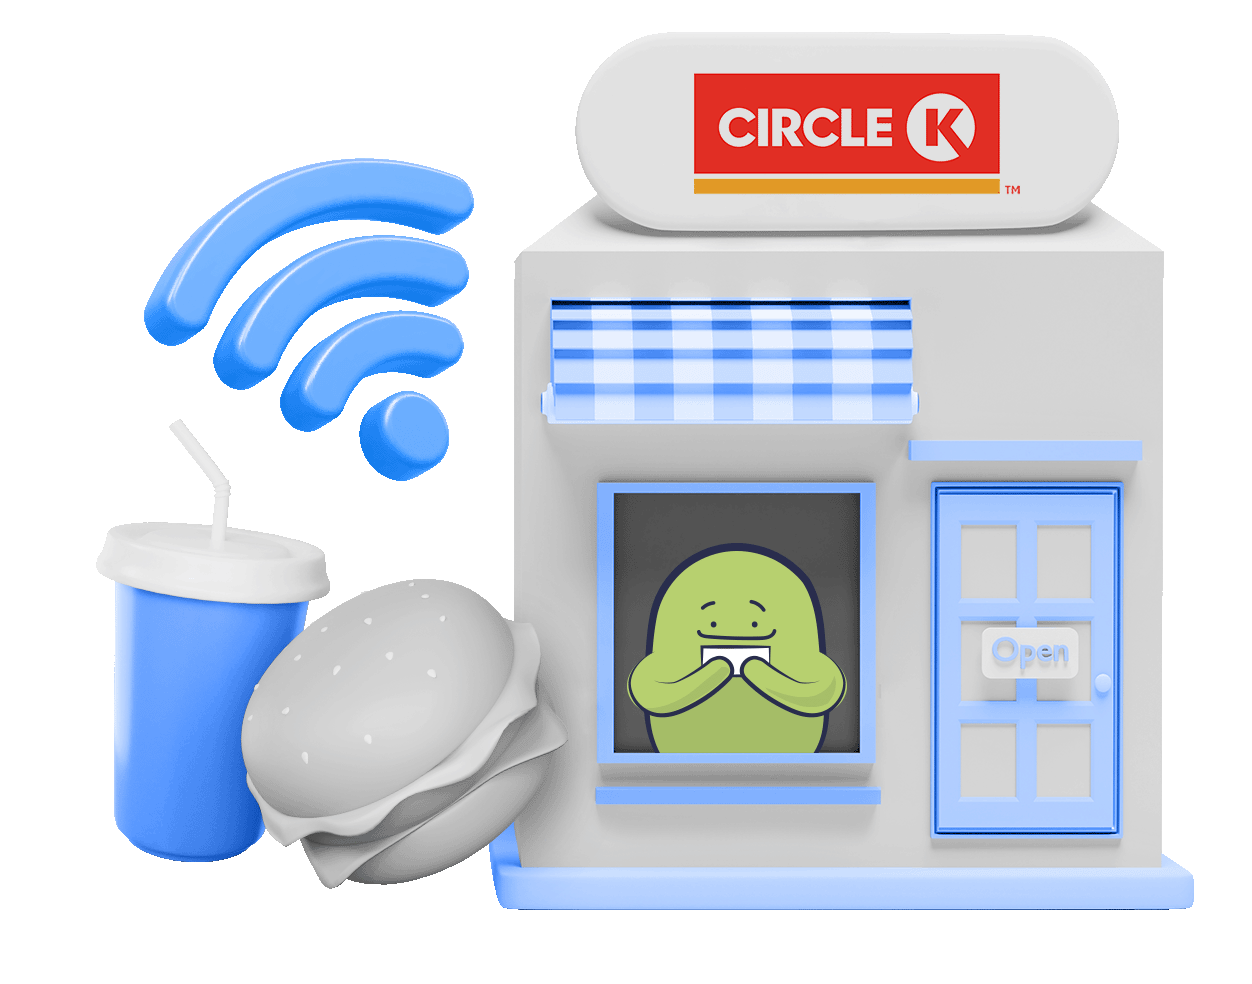 How to connect to Circle K WiFi safely